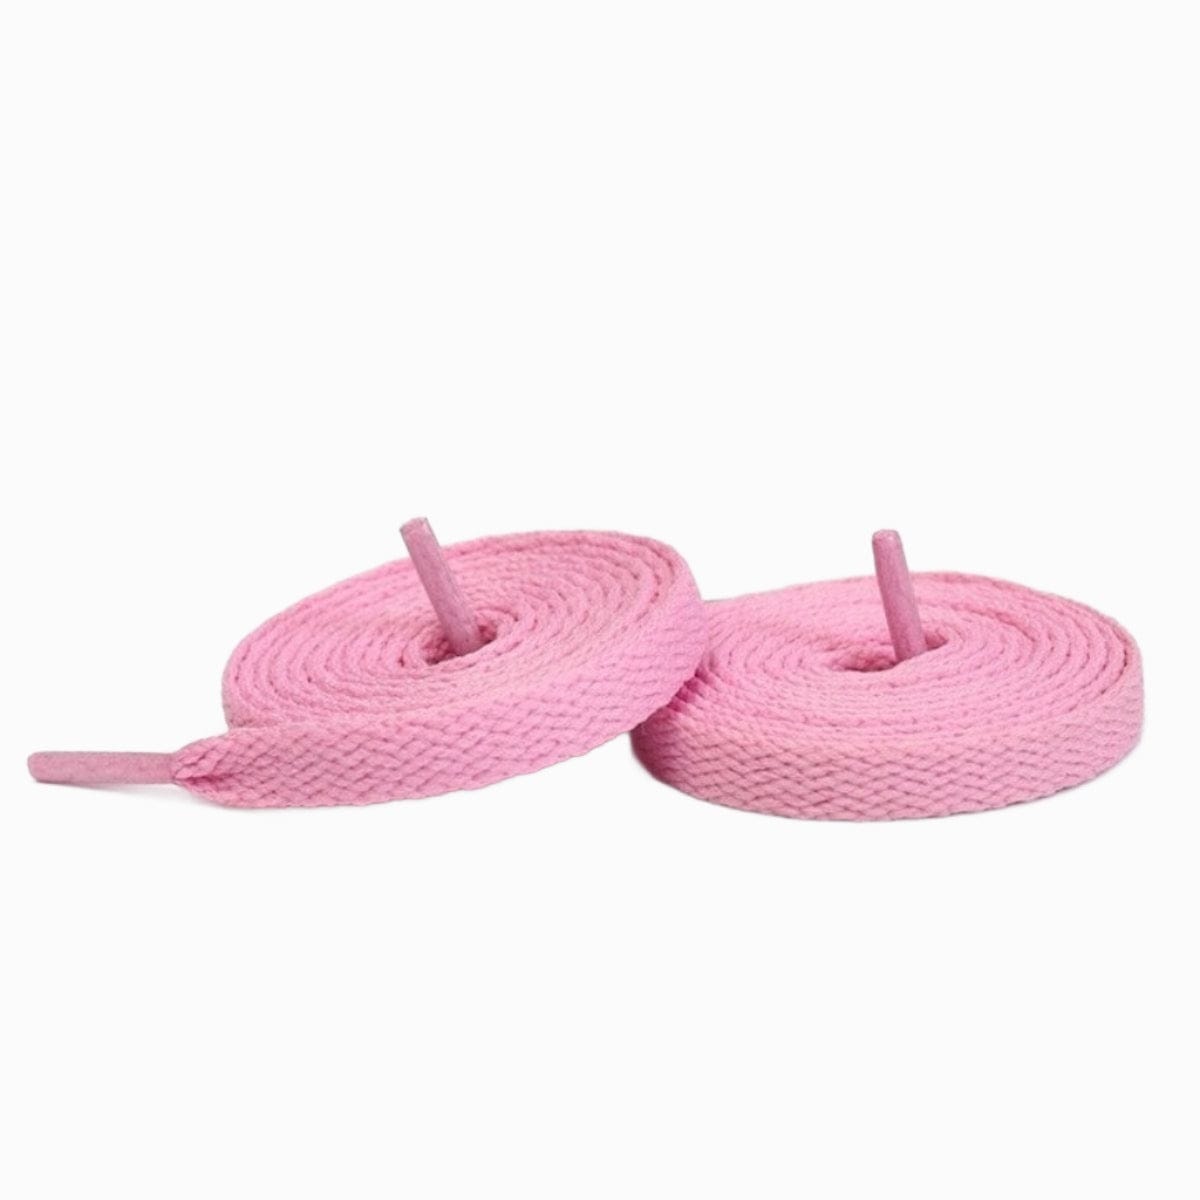 Pink Replacement Shoe Laces for Adidas Handball Spezial Sneakers by Kicks Shoelaces